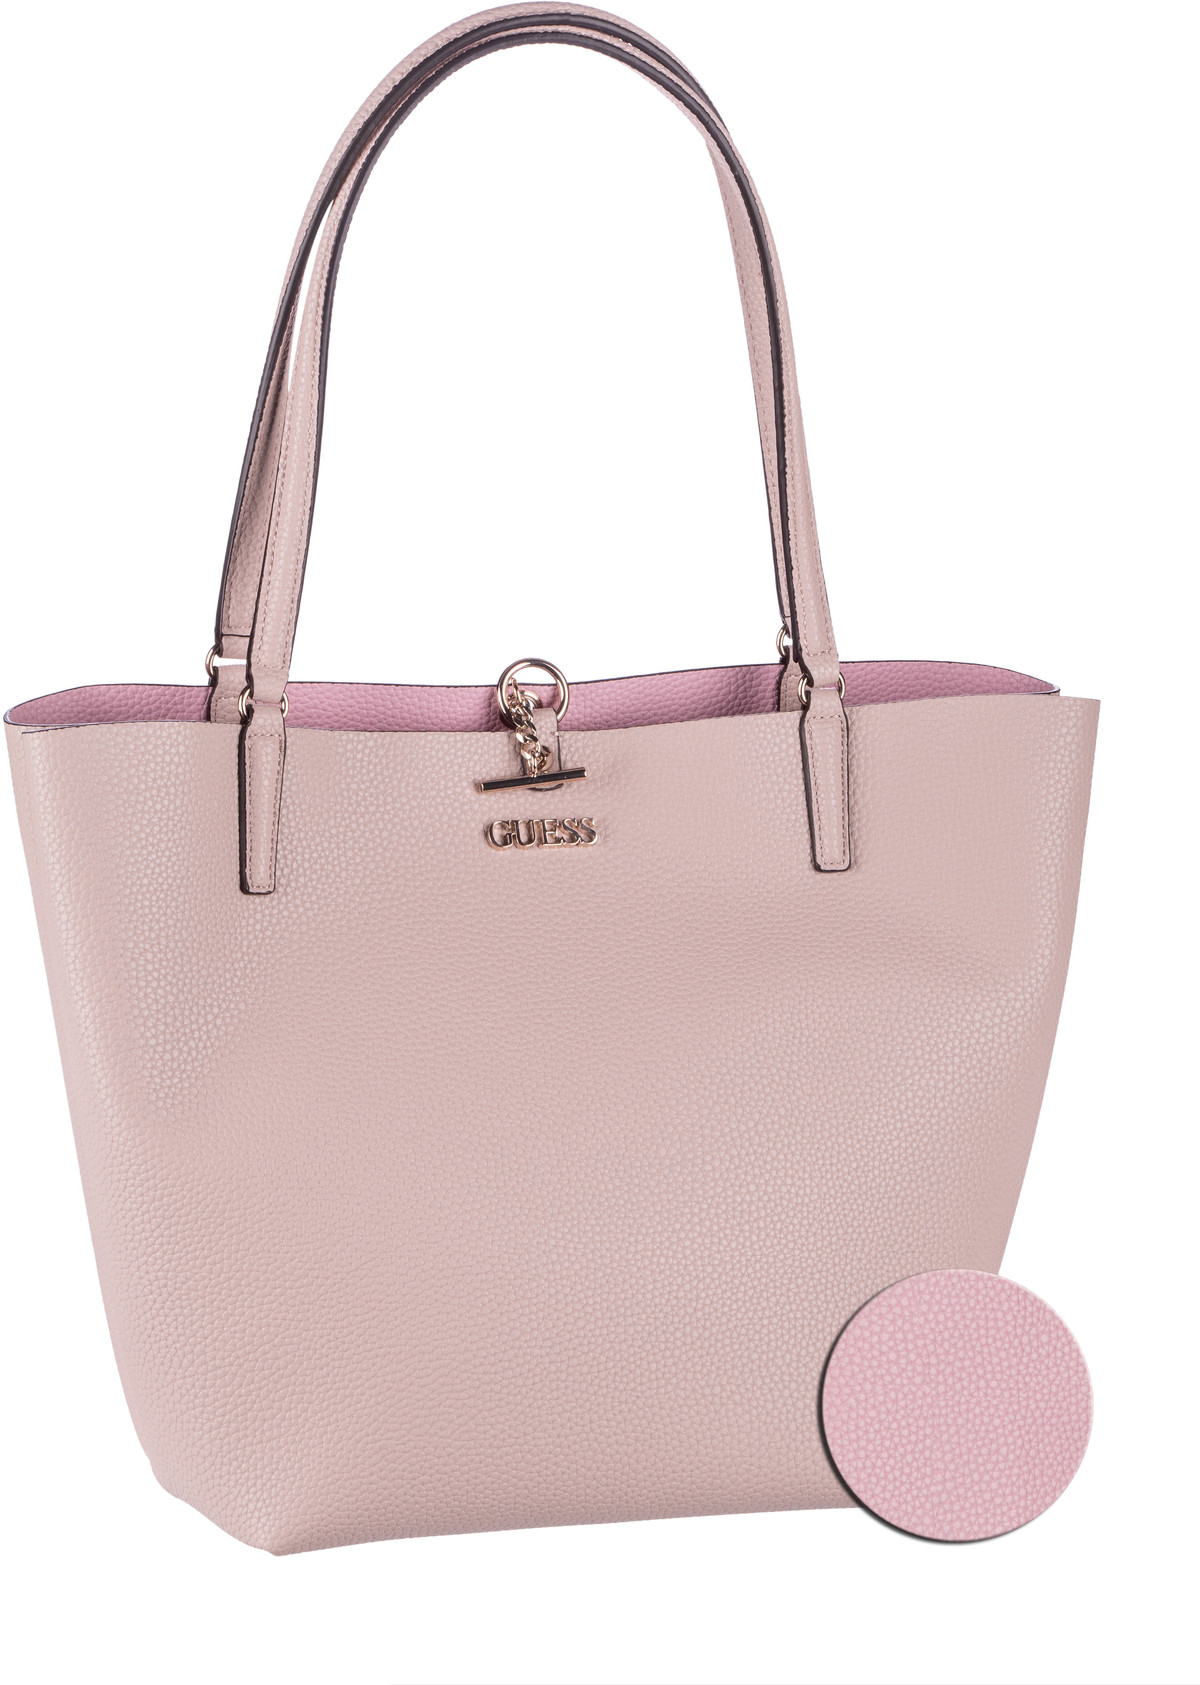 Guess Alby Toggle Tote - Almond